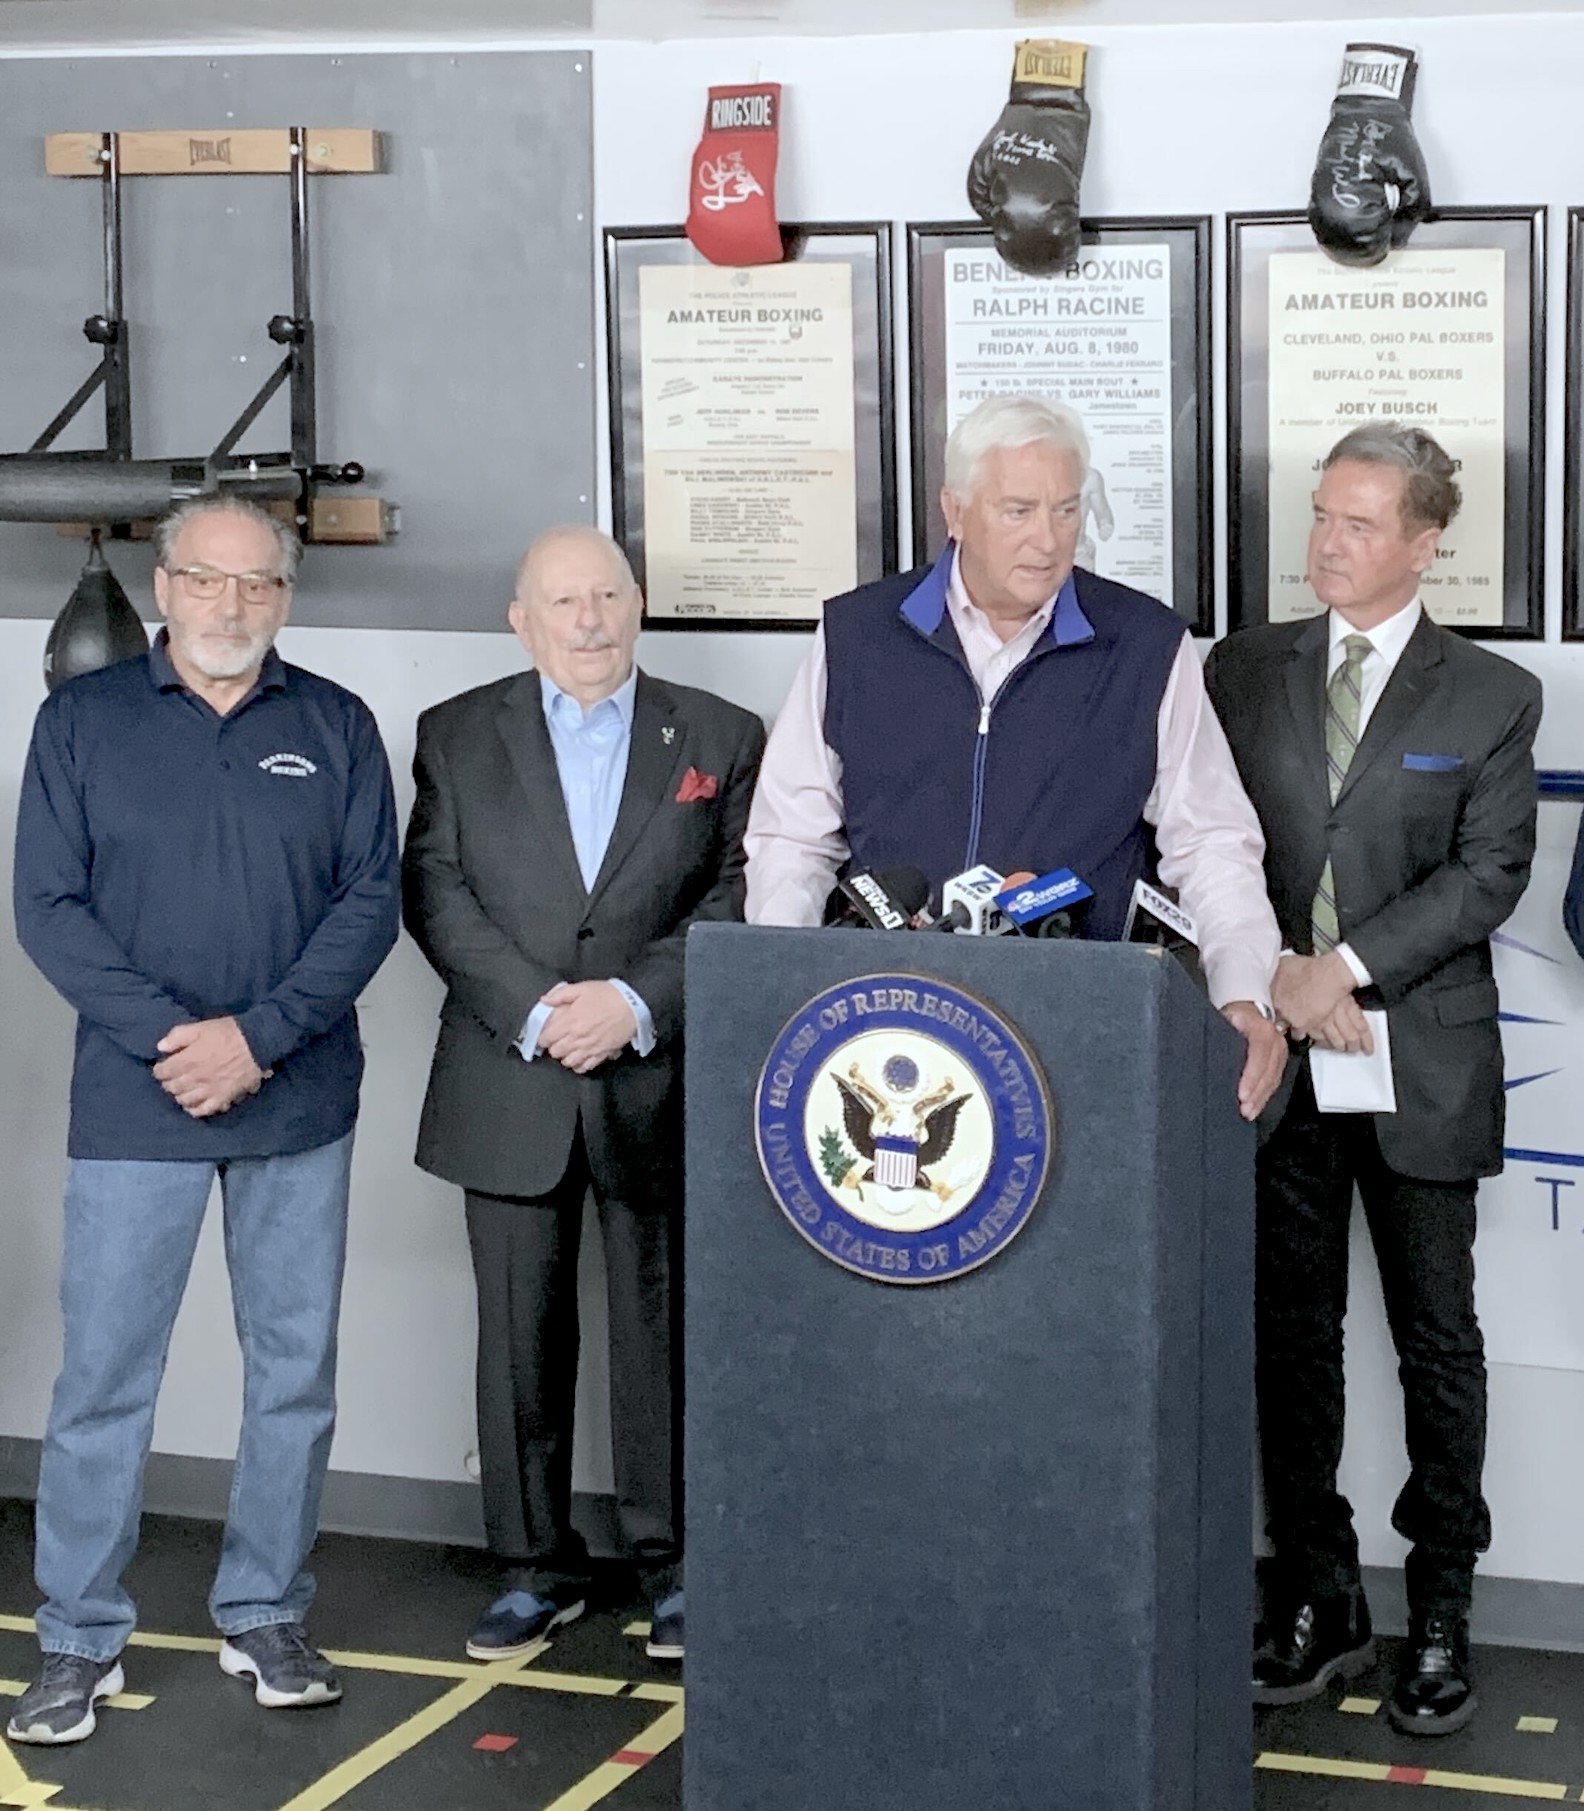 Pictured at a press conference are Parkinson's Boxing owner Dean Eoannou, Purple Heart recipient Dr. Patrick Welch, former Congressman Jack Quinn and current Congressman Brian Higgins. Parkinson's Boxing has locations in Tonawanda and Hamburg. Visit https://www.parkinsonsboxing.com/. (Submitted photo)